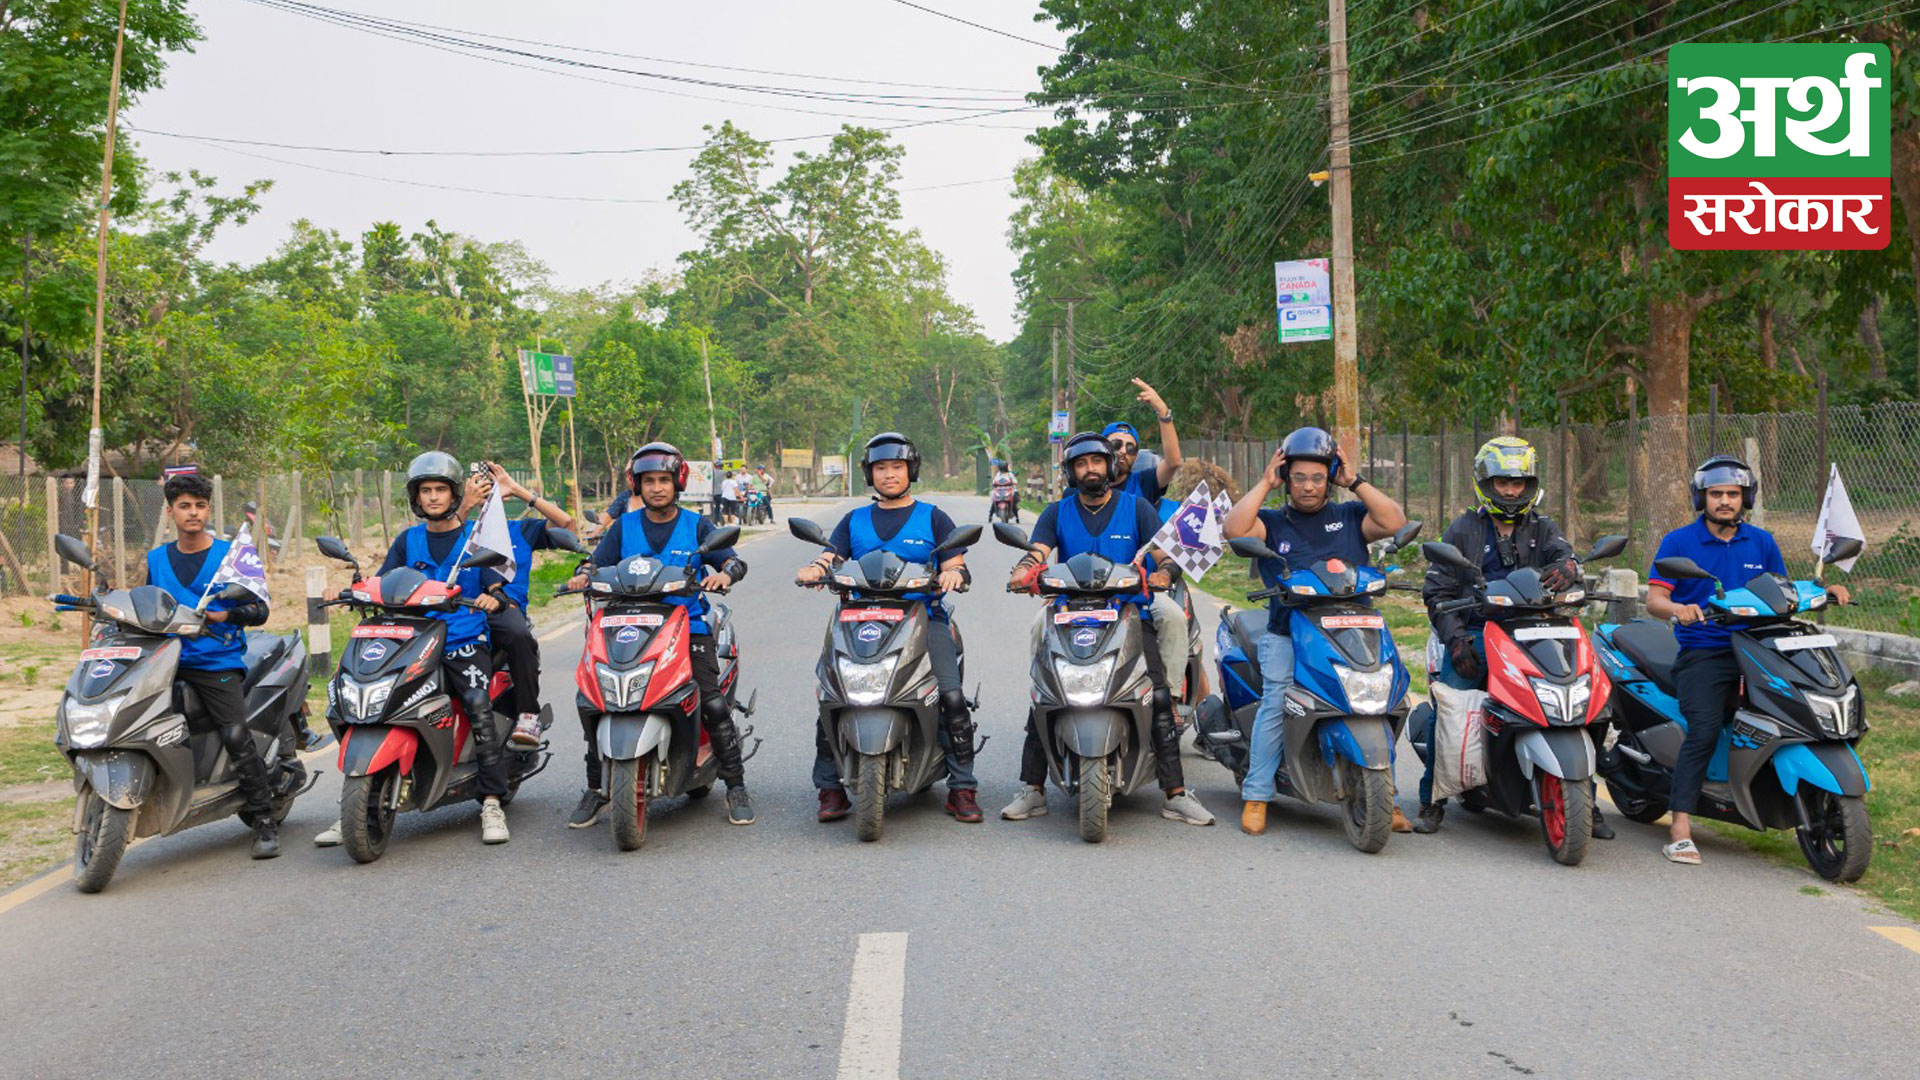 NOG Narayanghat Second Chapter Ride Completed